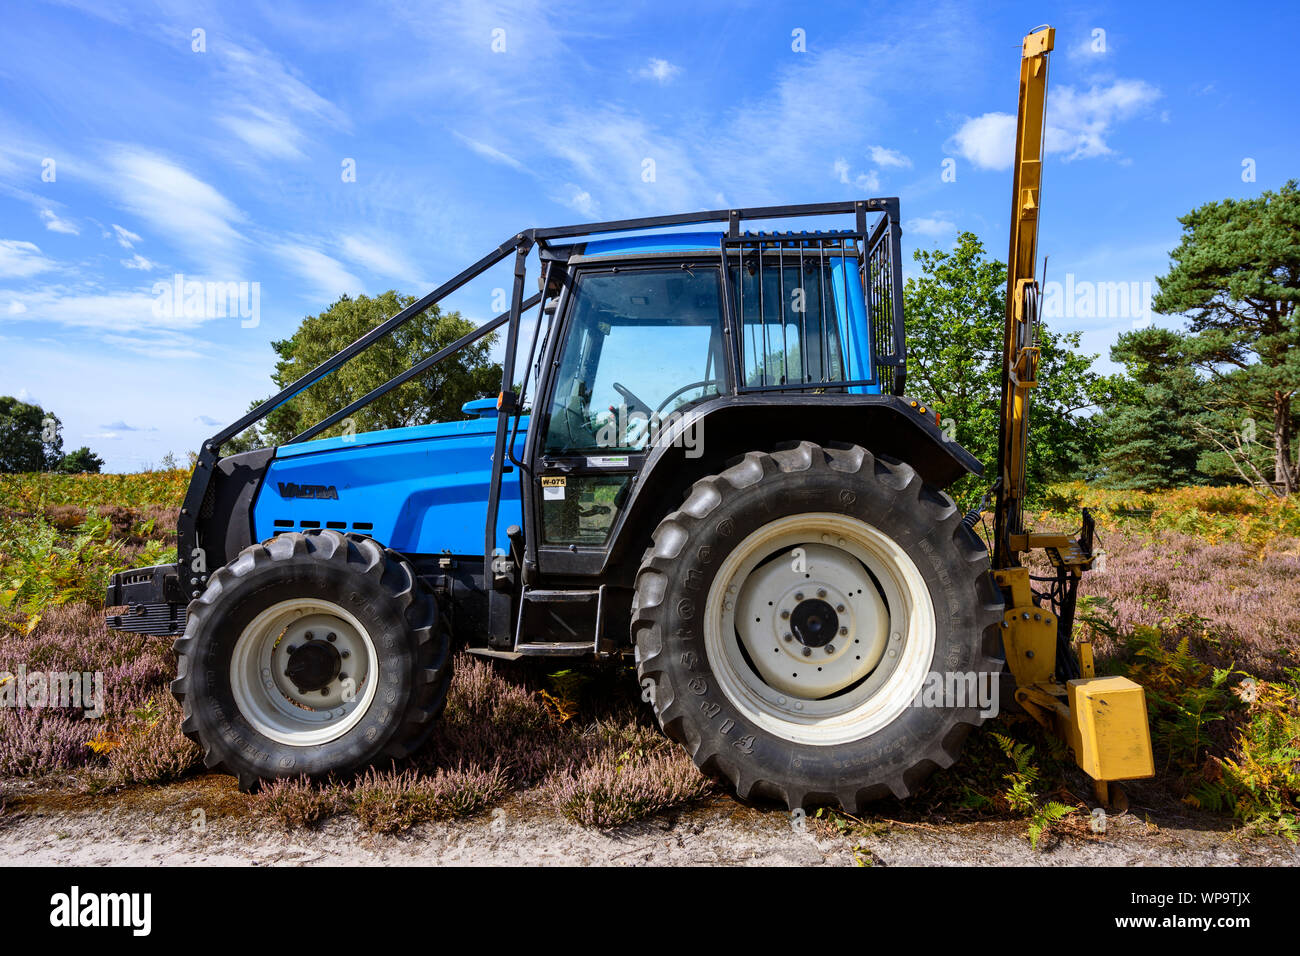 Valtra tractor with tree stump removal implement Stock Photo